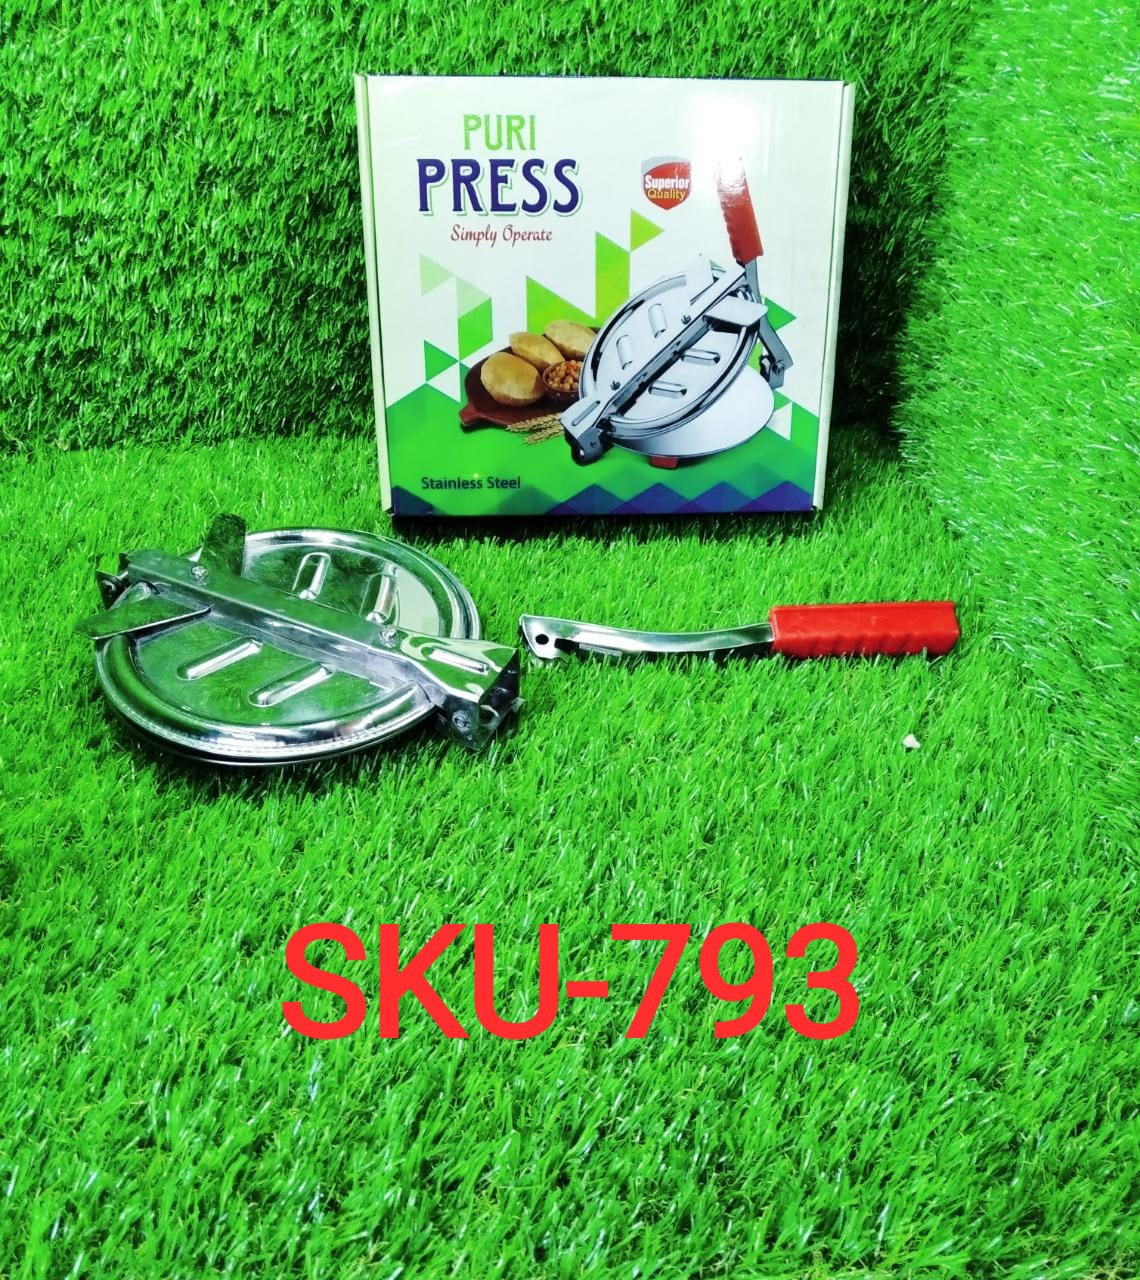 0793 Manual Stainless Steel Puri Press Machine/Maker with Handle (6 inch) Dukandaily